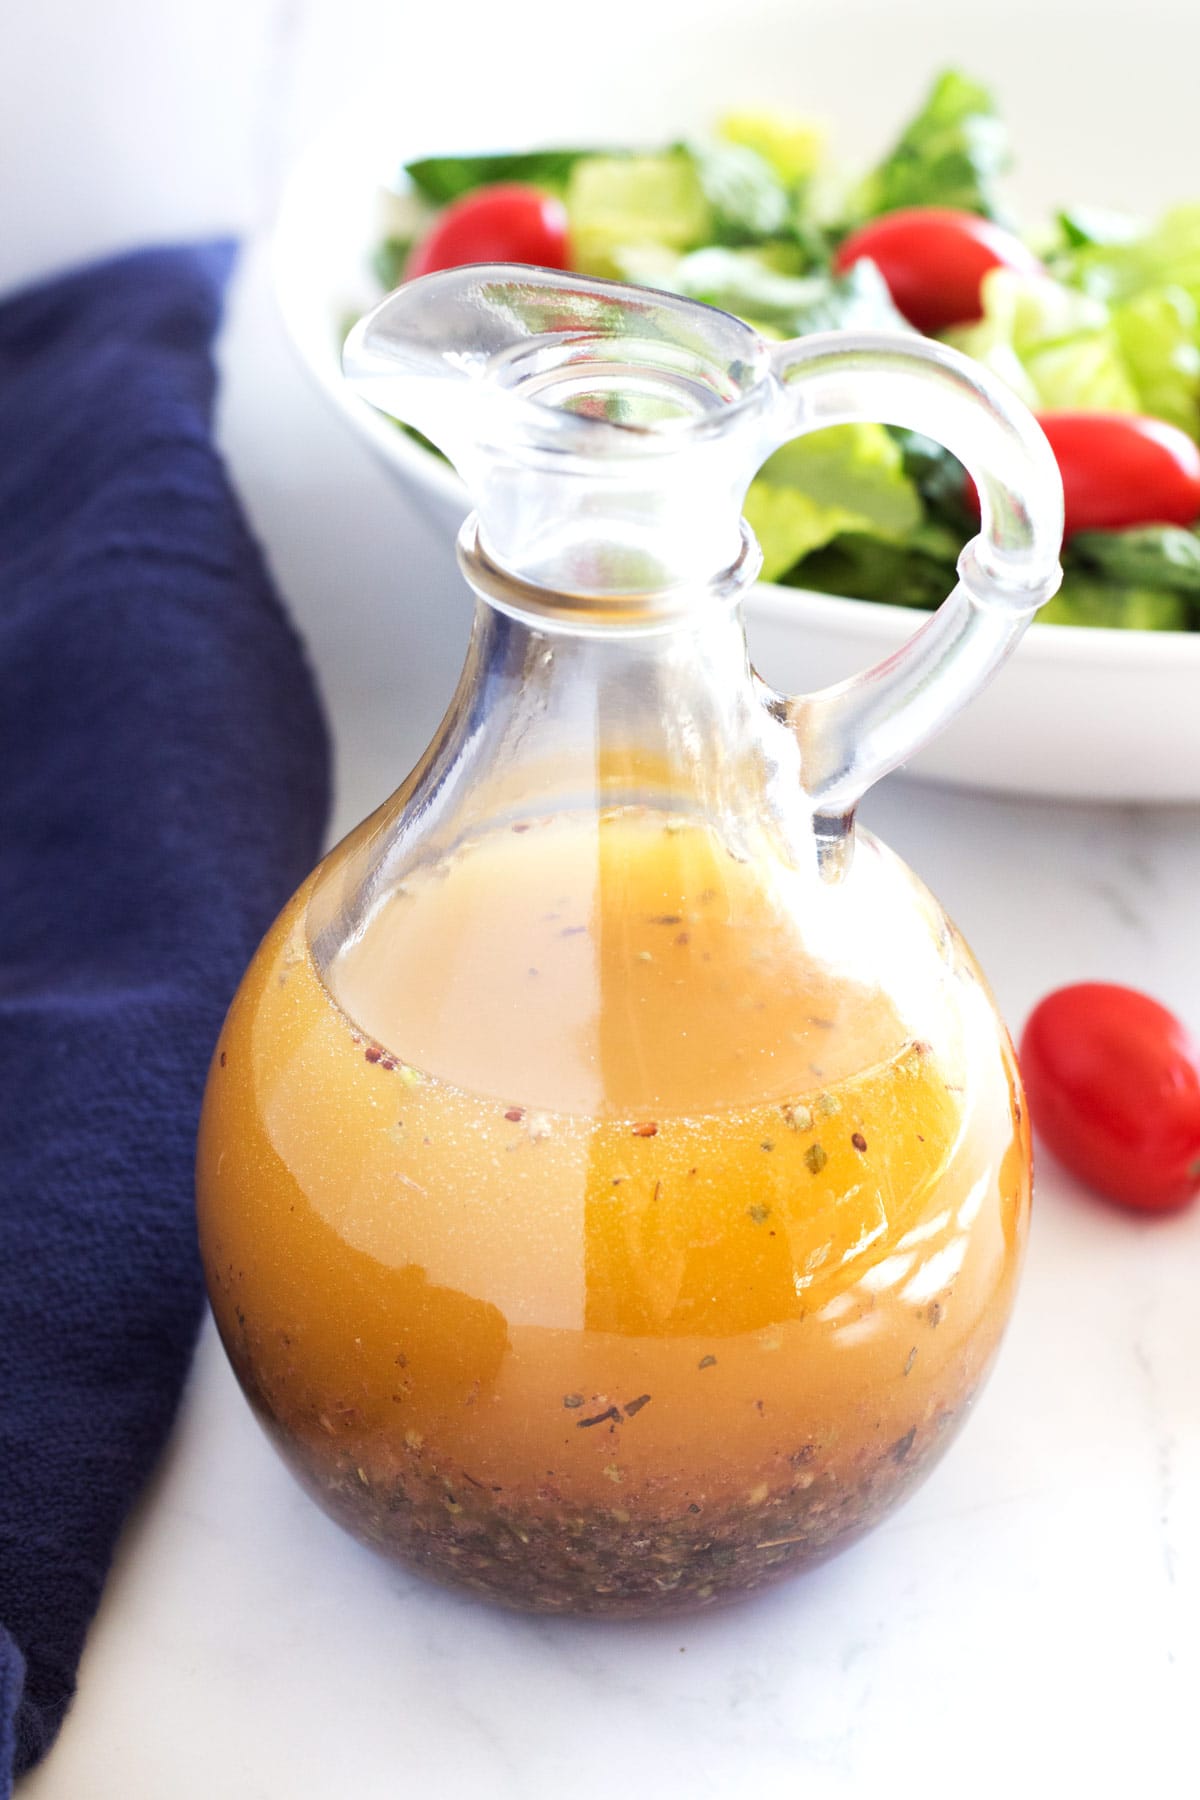 Clear jar of Greek vinaigrette with blue towel on side and green salad in background.